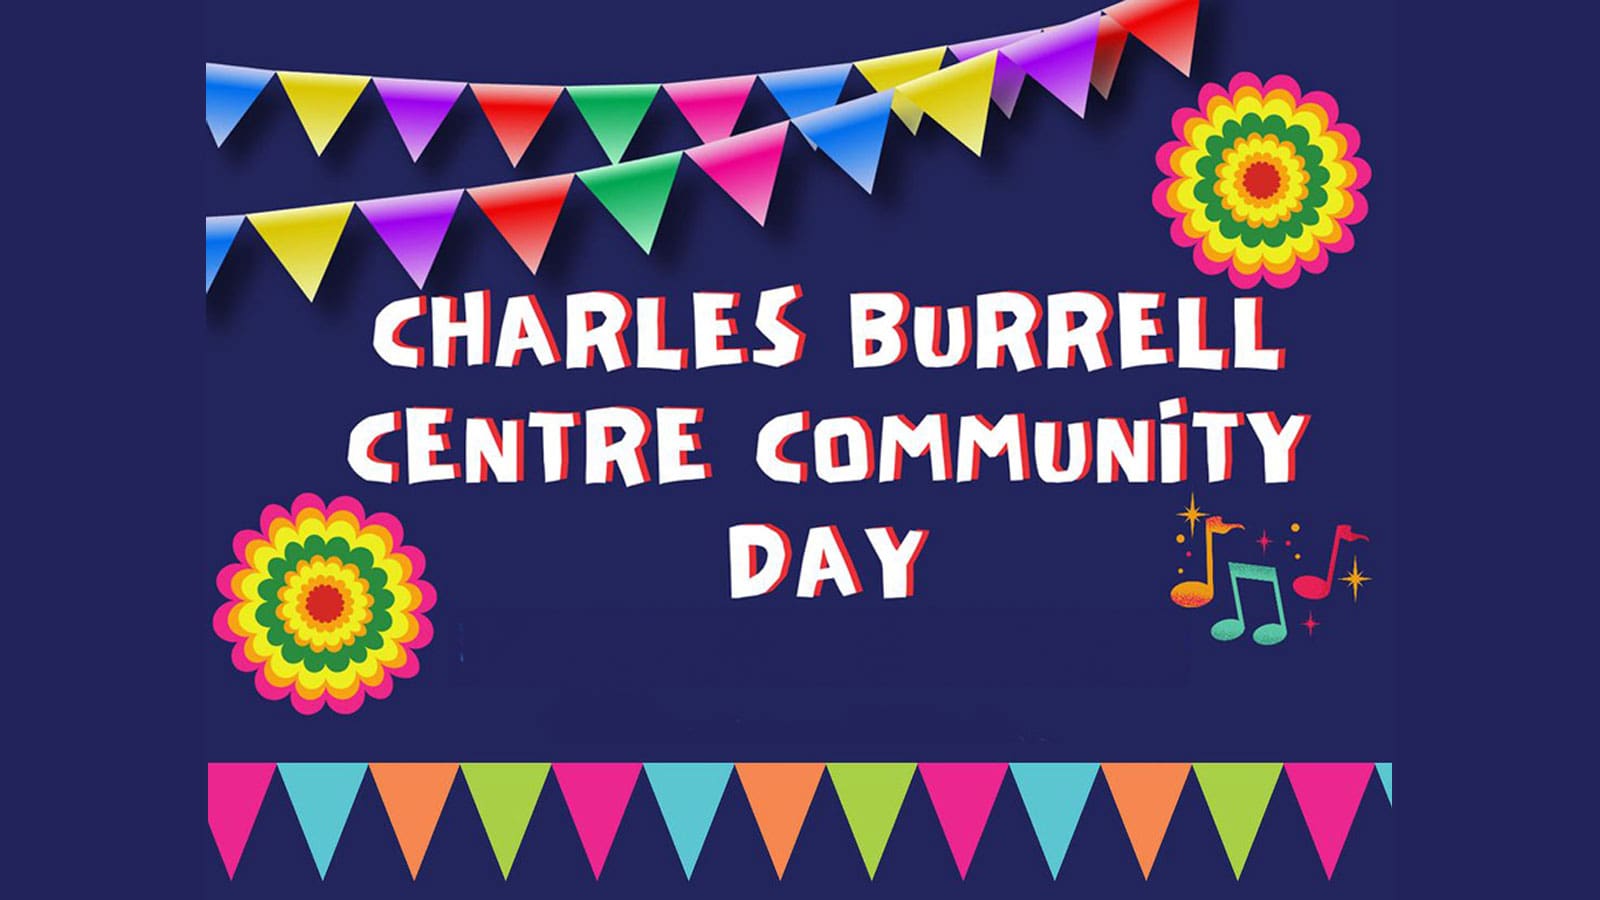 Thetford Bubbly Hub what's on and events Charles Burrell Community Day